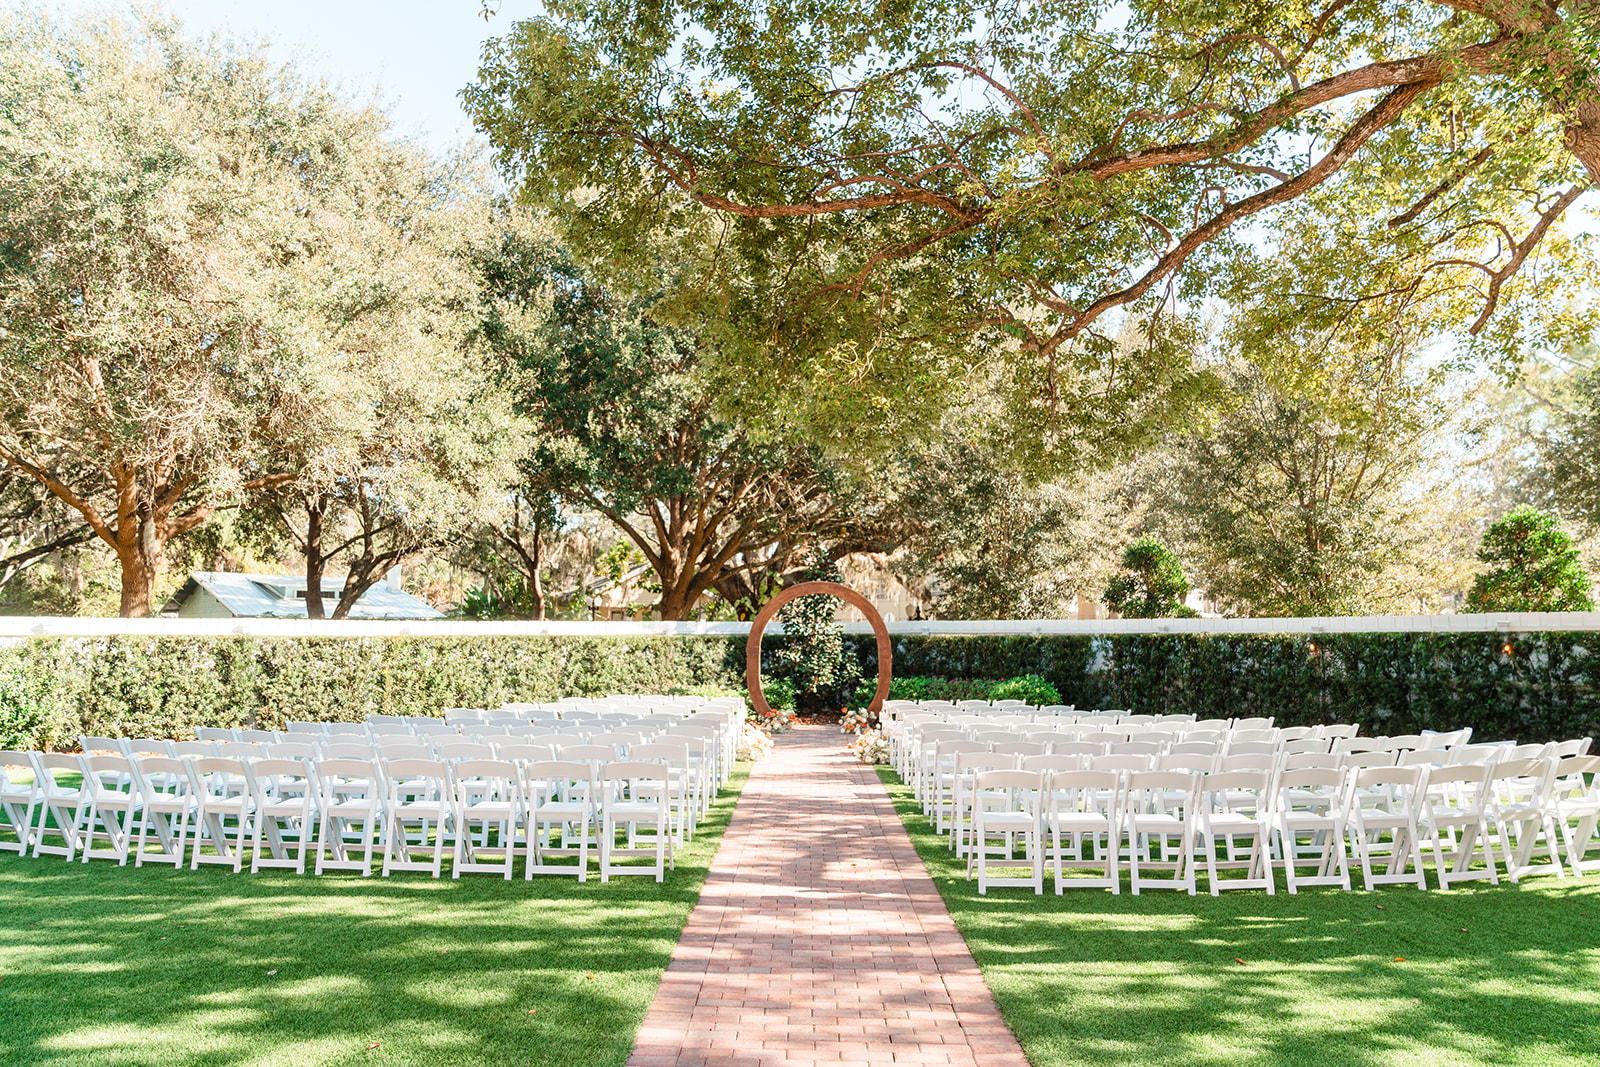 Empty ceremony area in the garden at Venue 1902, showcasing its elegant setting before the wedding.